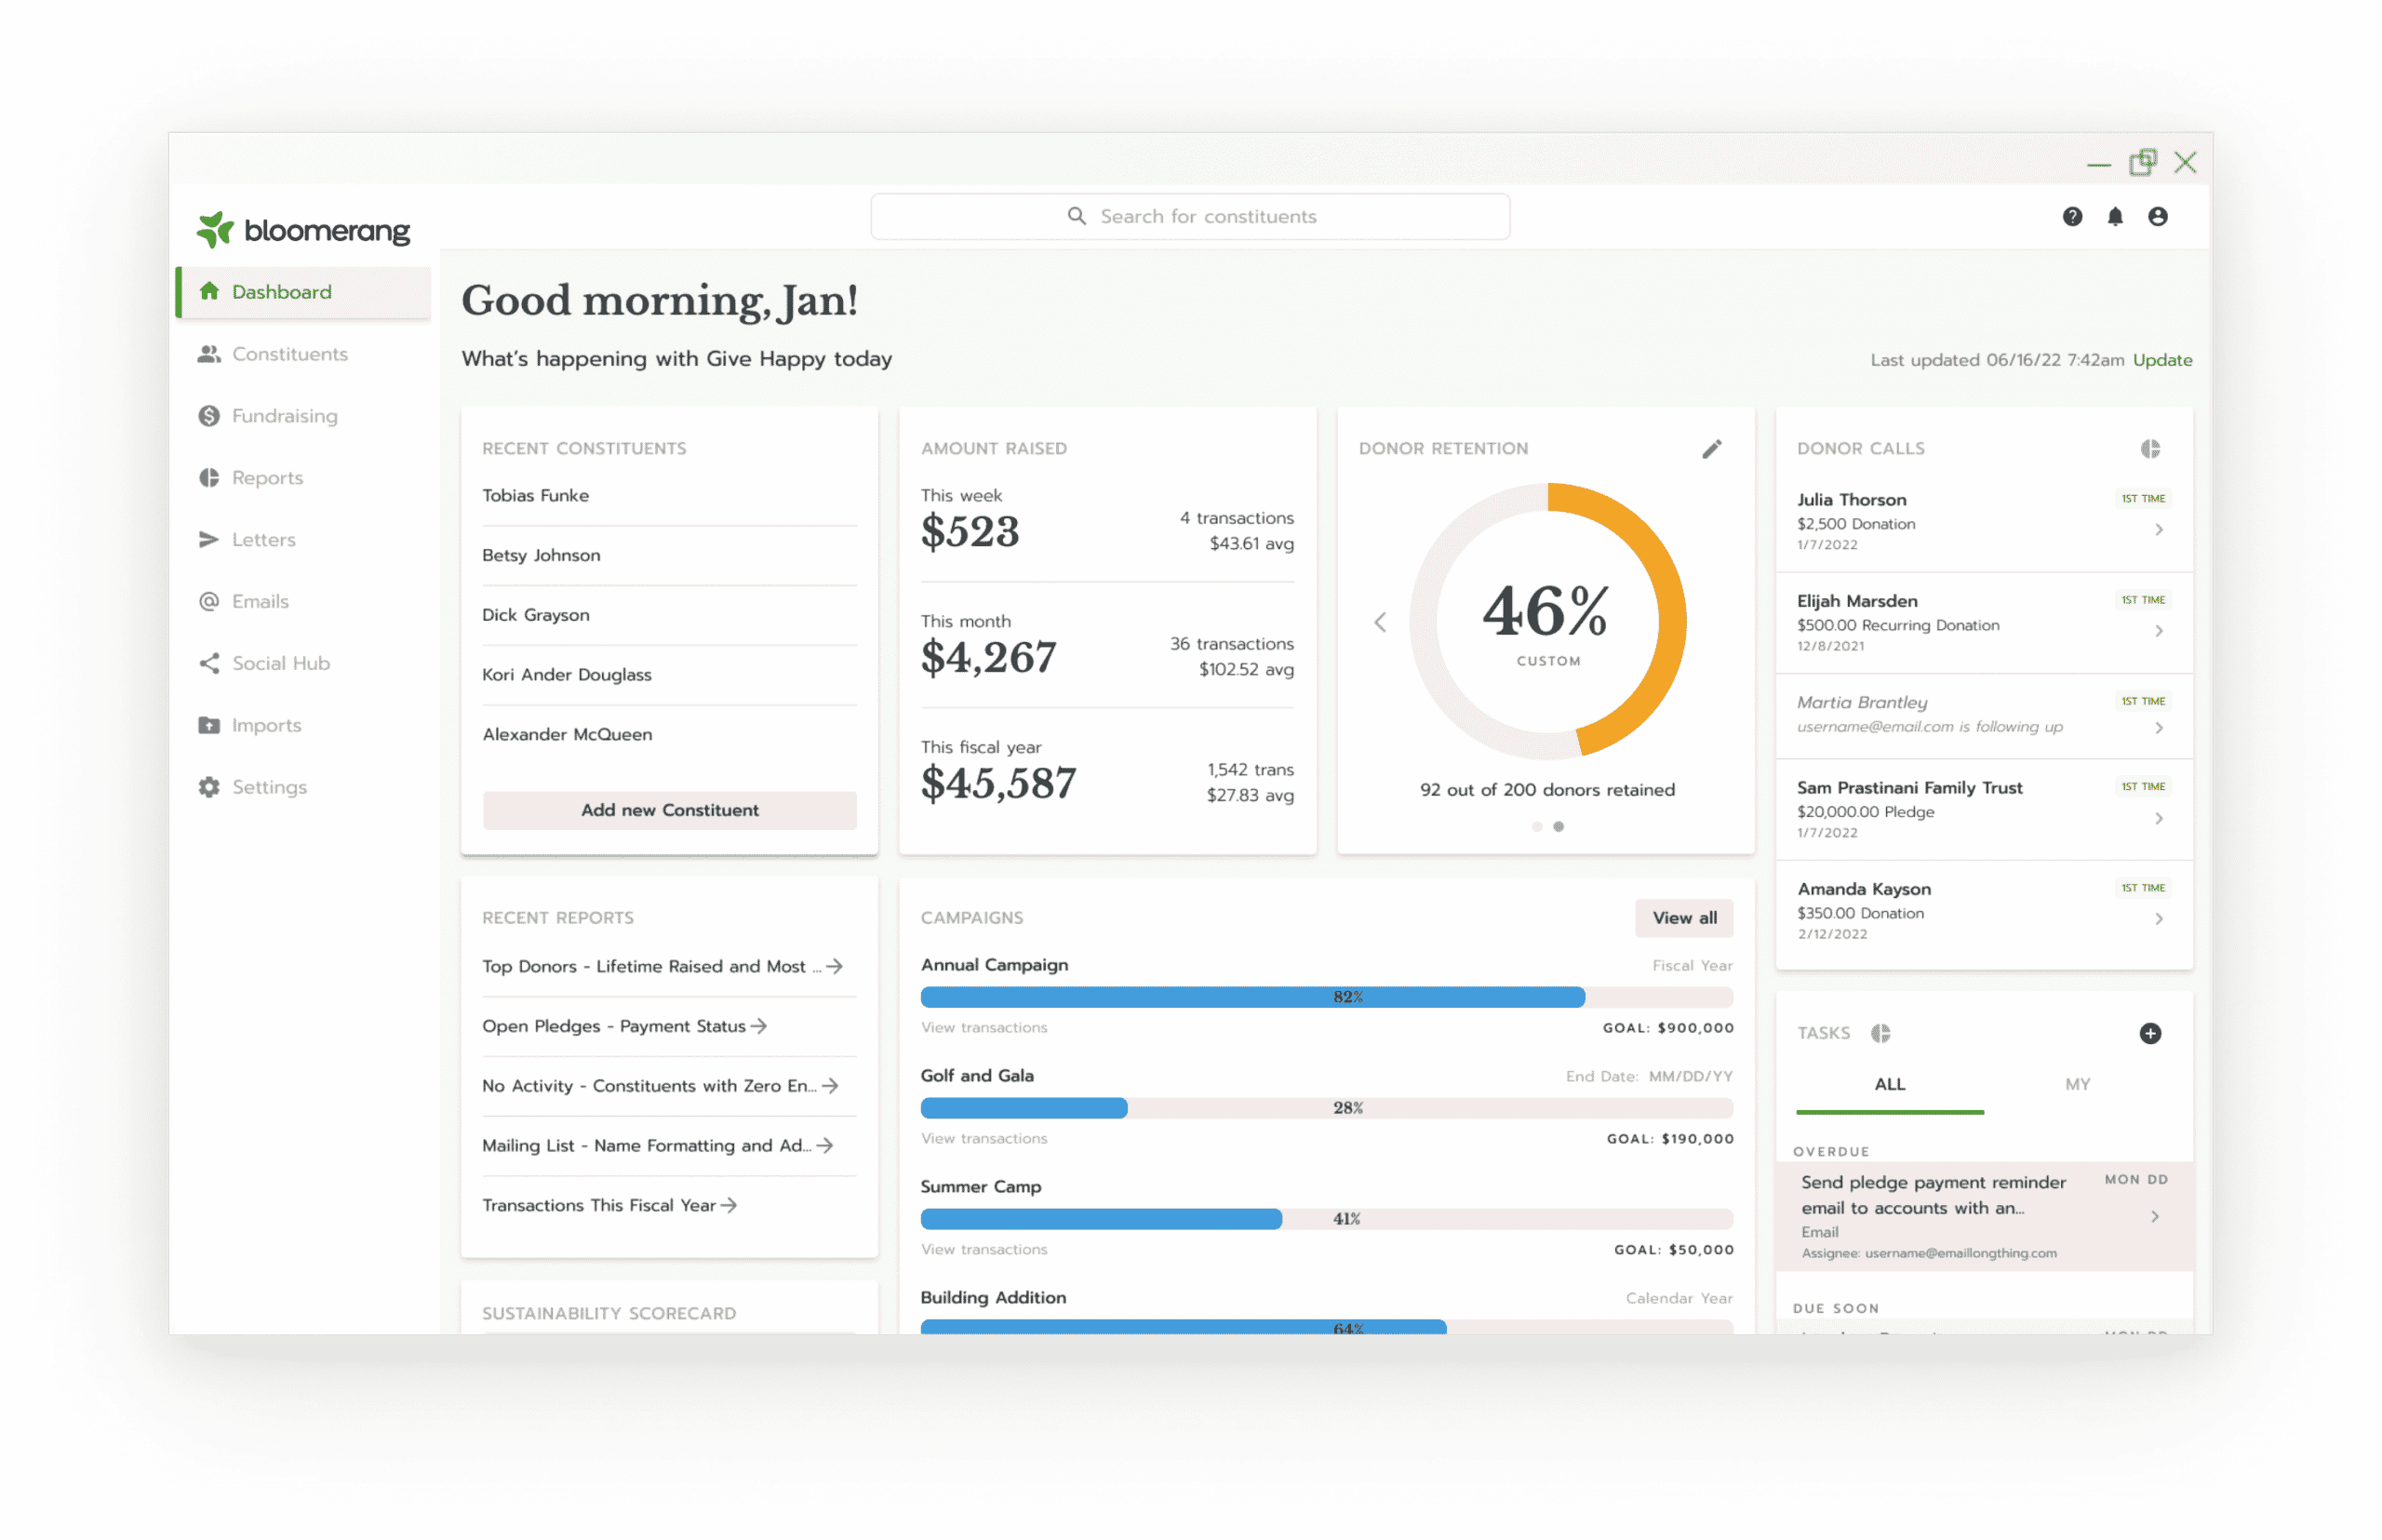 This is an example of a dashboard that can show important online fundraising metrics.